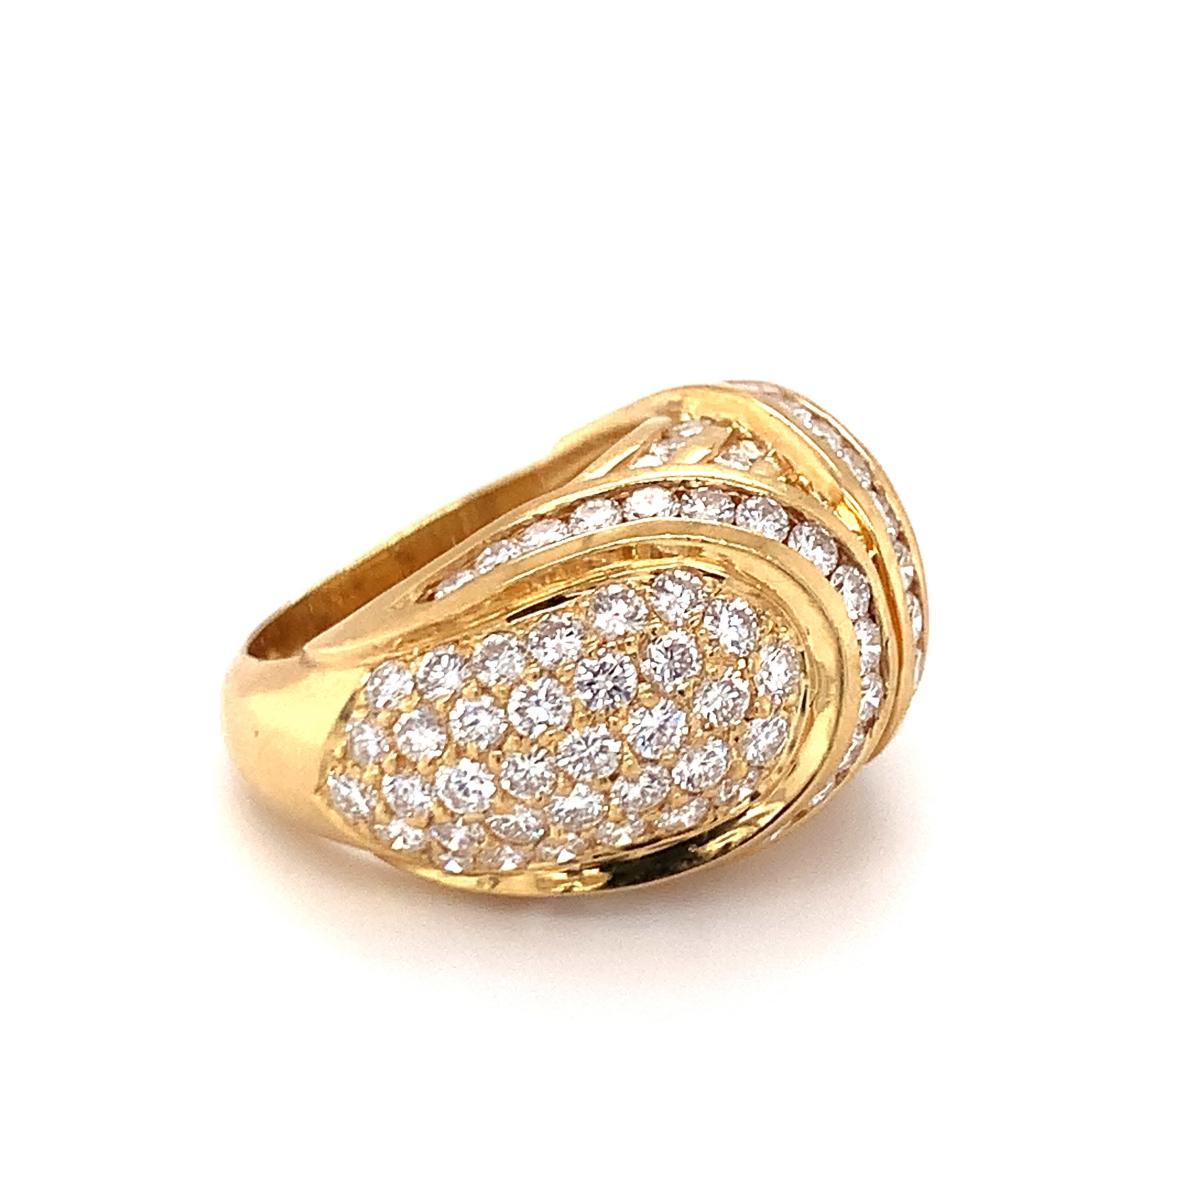 Pave Diamond Dome 18K Yellow Gold Ring, circa 1970s For Sale 2